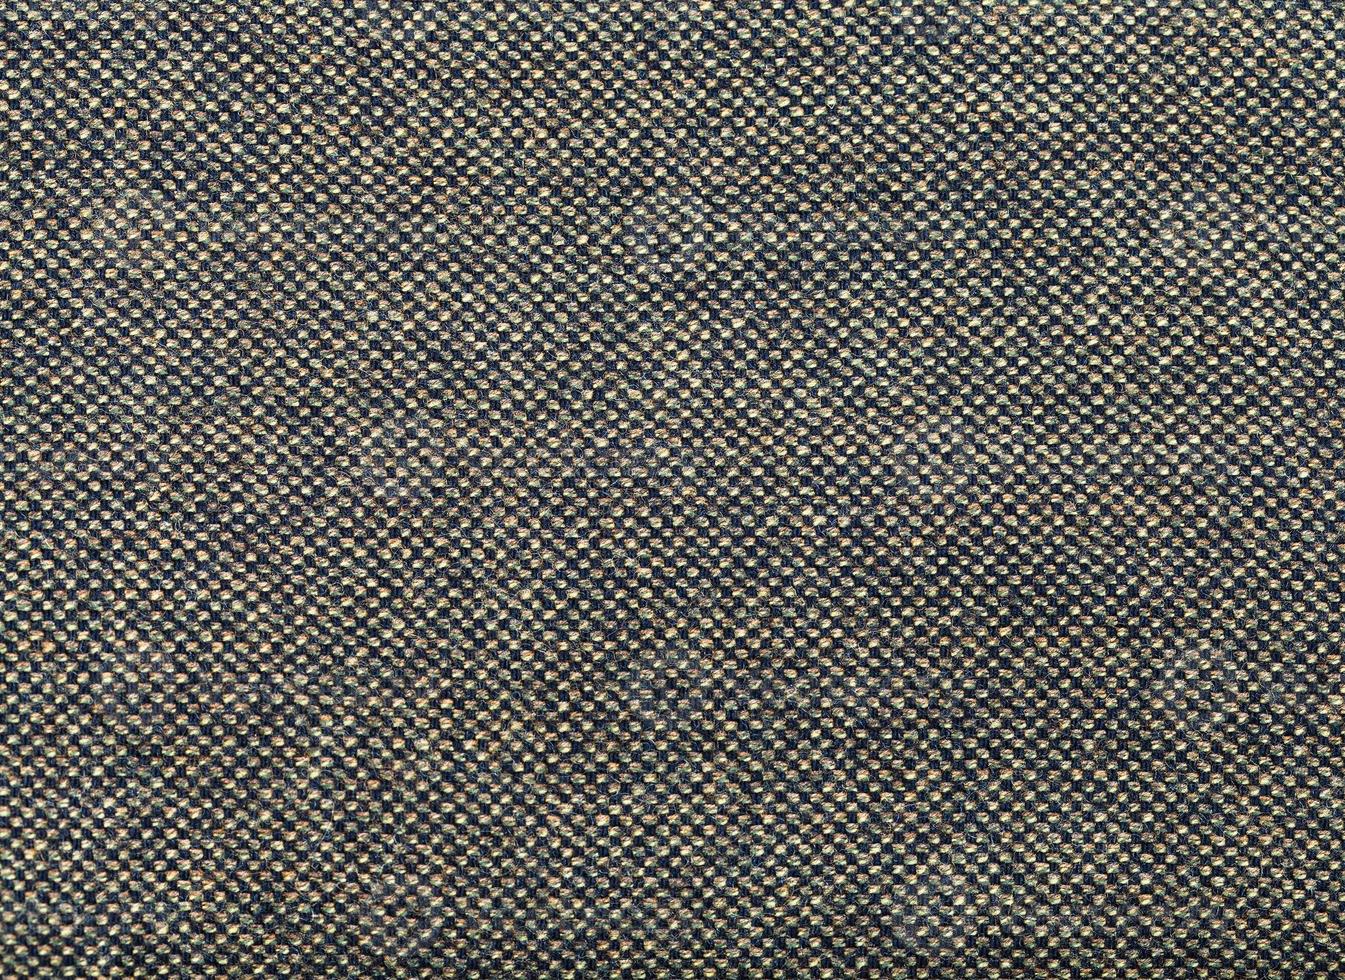 background from green and brown tweed fabric photo